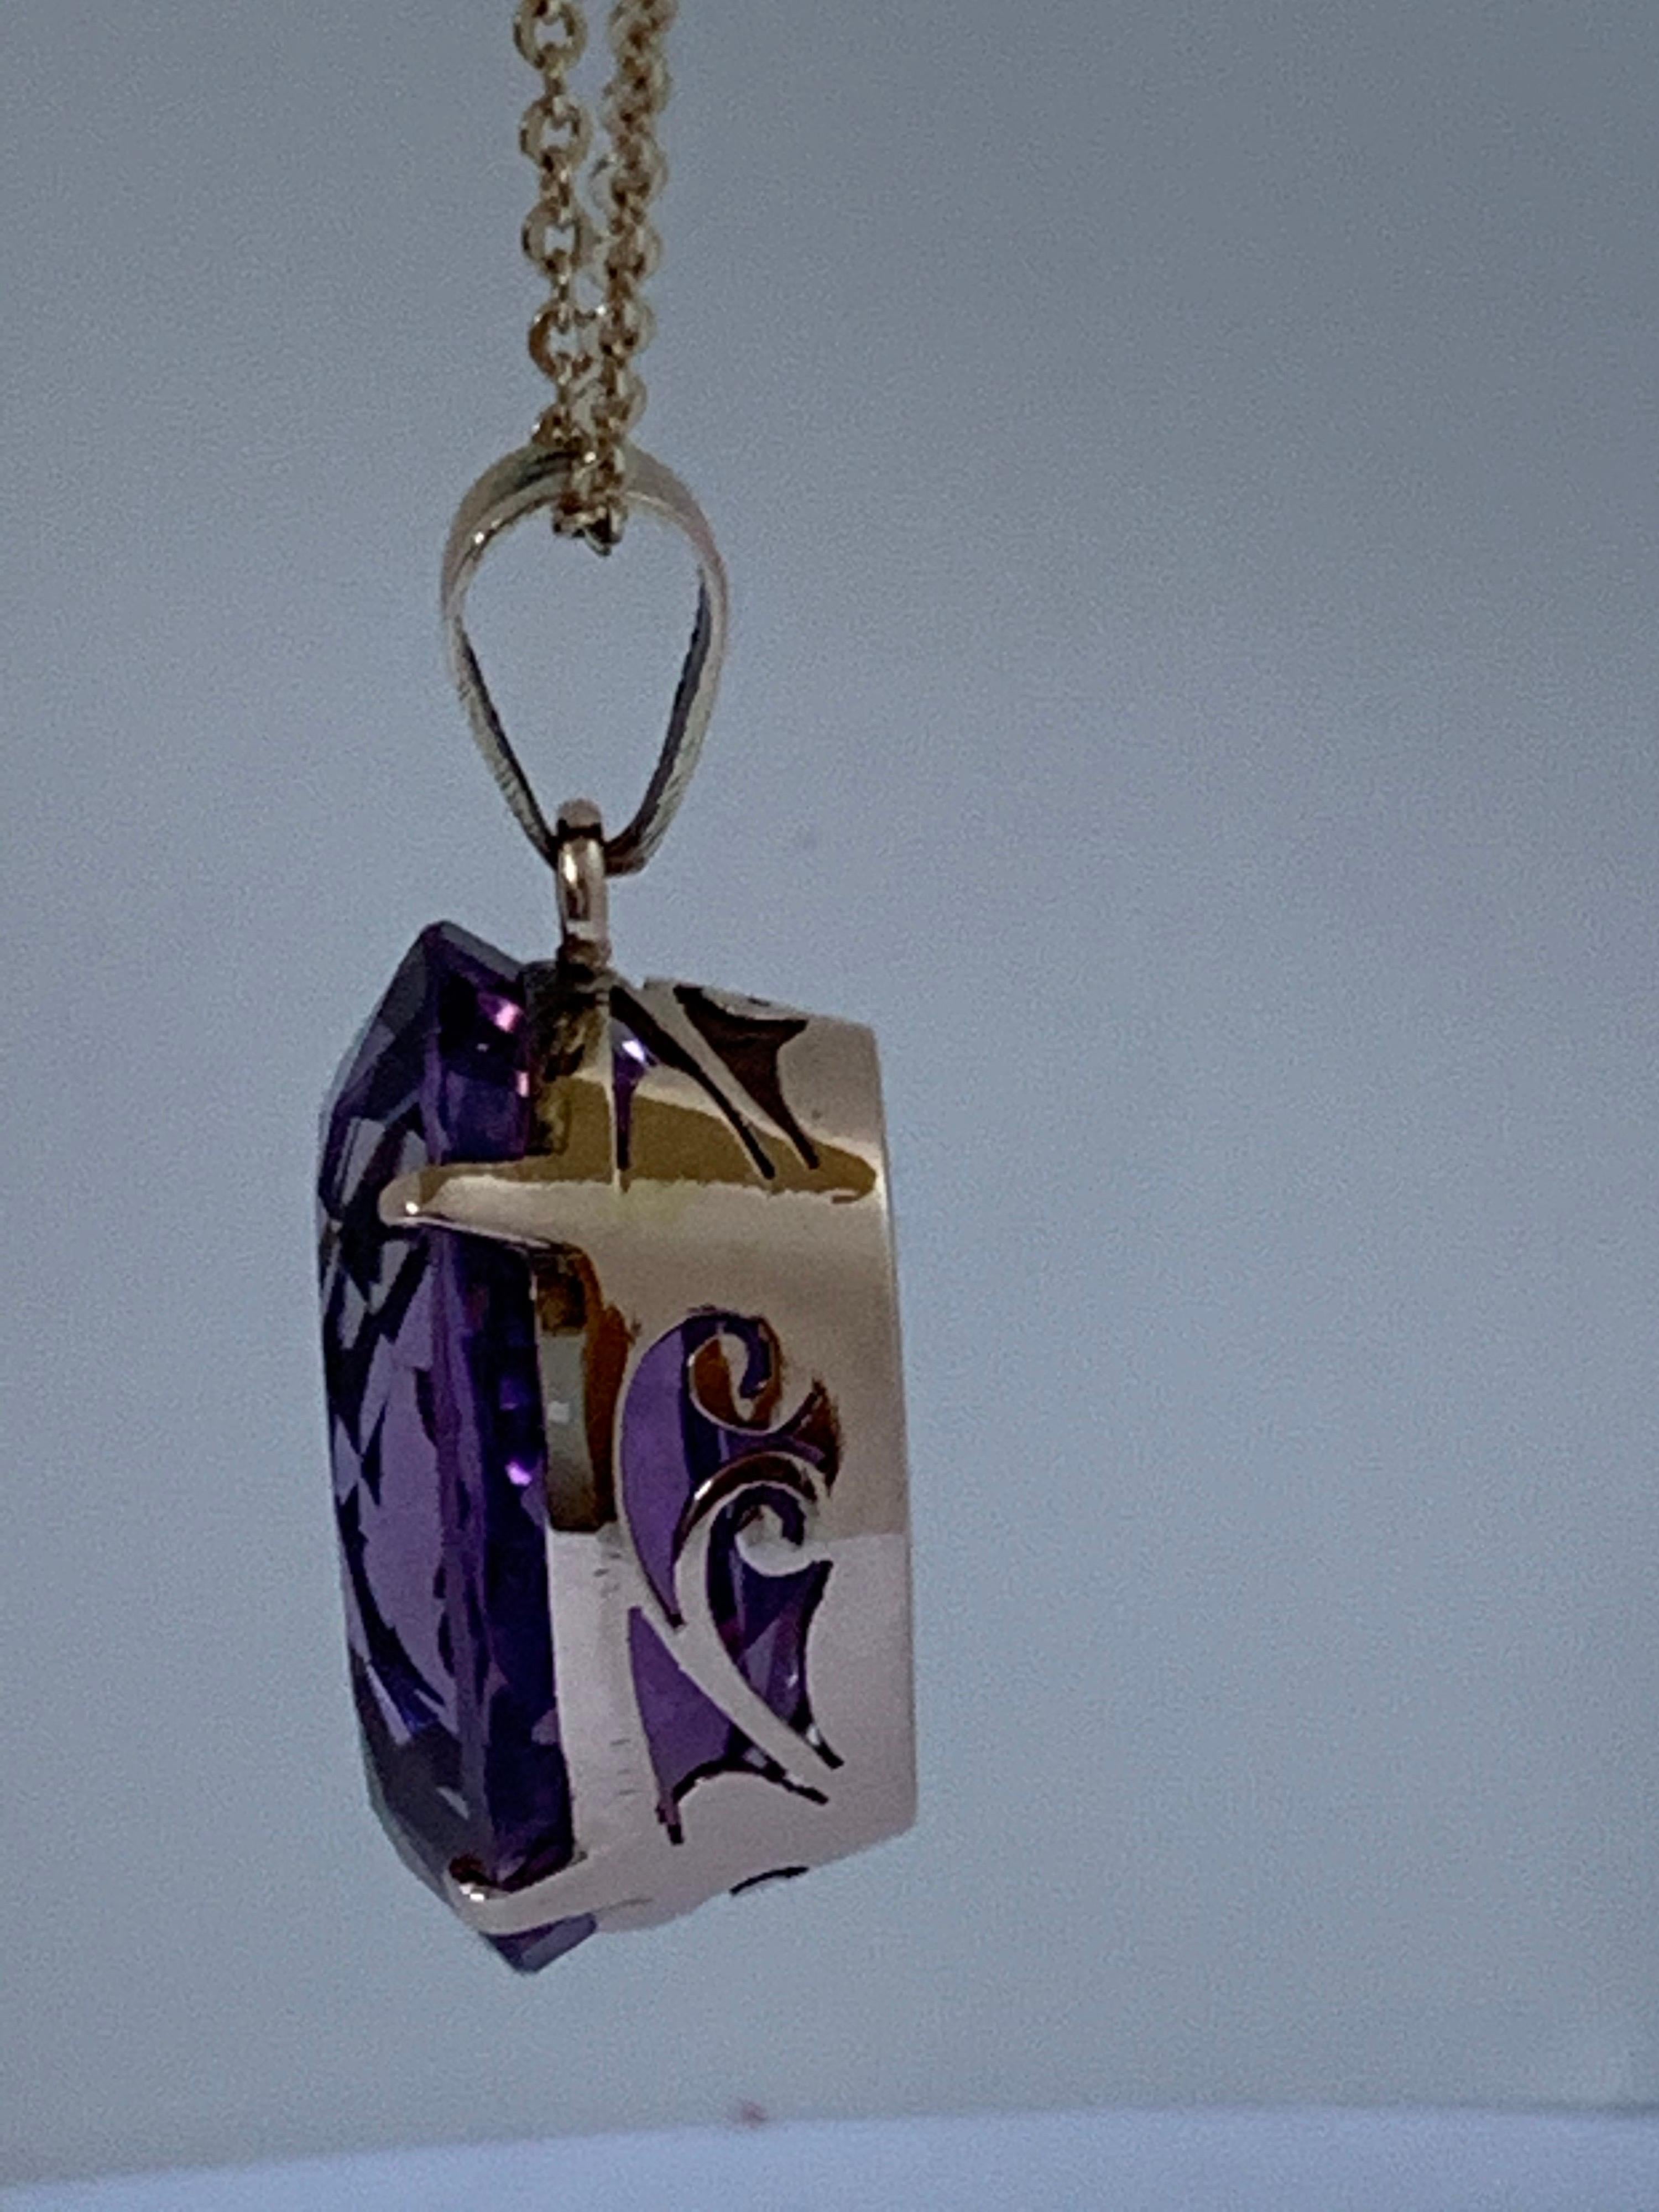 Oval 15 mm X 20 mm Amethyst set in 14 Karat Yellow gold is one of a kind handcrafted Pendant, The stone also hand cut and polished. The Amethyst is not treated or colored, this is 100 % natural stones.

Note: The Chain is not included in this